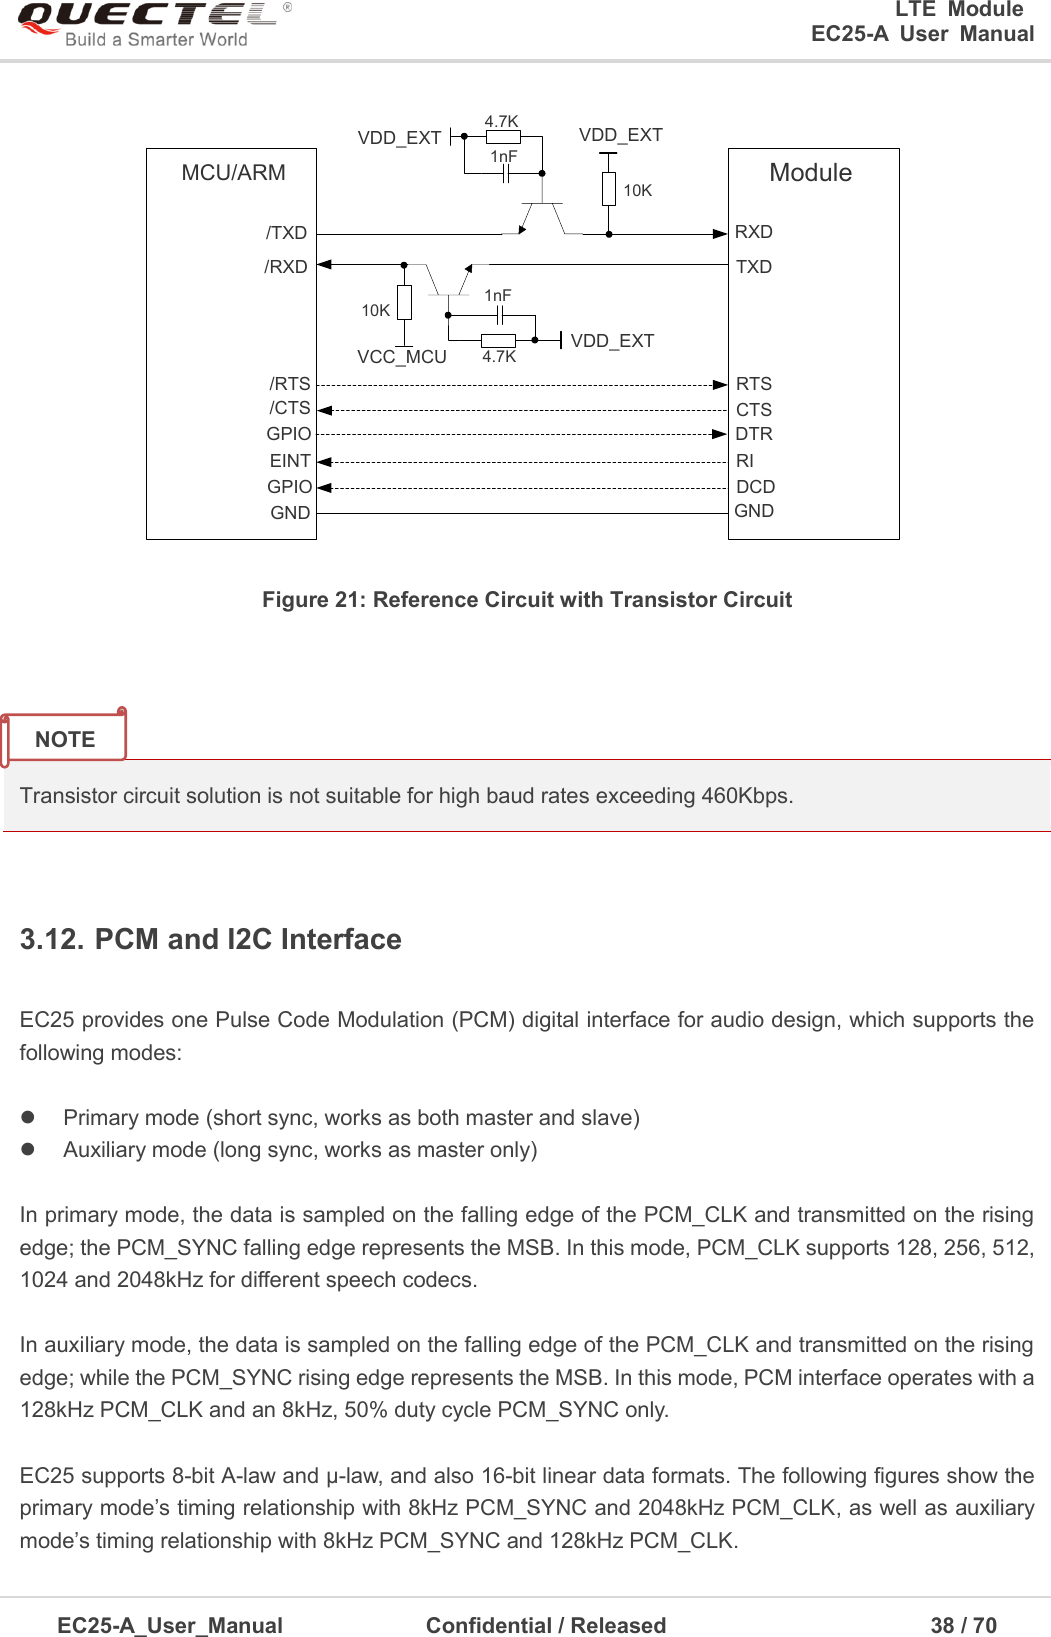 0      LTE  Module      EC25-A  User  Manual EC25-A_User_Manual  Confidential / Released      38 / 7  MCU/ARM/TXD/RXDVDD_EXT10KVCC_MCU 4.7K10KVDD_EXTTXDRXDRTSCTSDTRRI/RTS/CTSGNDGPIO DCDModuleGPIOEINTVDD_EXT4.7KGND1nF1nFFigure 21: Reference Circuit with Transistor Circuit Transistor circuit solution is not suitable for high baud rates exceeding 460Kbps. 3.12. PCM and I2C Interface EC25 provides one Pulse Code Modulation (PCM) digital interface for audio design, which supports the following modes: Primary mode (short sync, works as both master and slave)Auxiliary mode (long sync, works as master only)In primary mode, the data is sampled on the falling edge of the PCM_CLK and transmitted on the rising edge; the PCM_SYNC falling edge represents the MSB. In this mode, PCM_CLK supports 128, 256, 512, 1024 and 2048kHz for different speech codecs. In auxiliary mode, the data is sampled on the falling edge of the PCM_CLK and transmitted on the rising edge; while the PCM_SYNC rising edge represents the MSB. In this mode, PCM interface operates with a 128kHz PCM_CLK and an 8kHz, 50% duty cycle PCM_SYNC only. EC25 supports 8-bit A-law and μ-law, and also 16-bit linear data formats. The following figures show the primary mode’s timing relationship with 8kHz PCM_SYNC and 2048kHz PCM_CLK, as well as auxiliary mode’s timing relationship with 8kHz PCM_SYNC and 128kHz PCM_CLK.   NOTE 